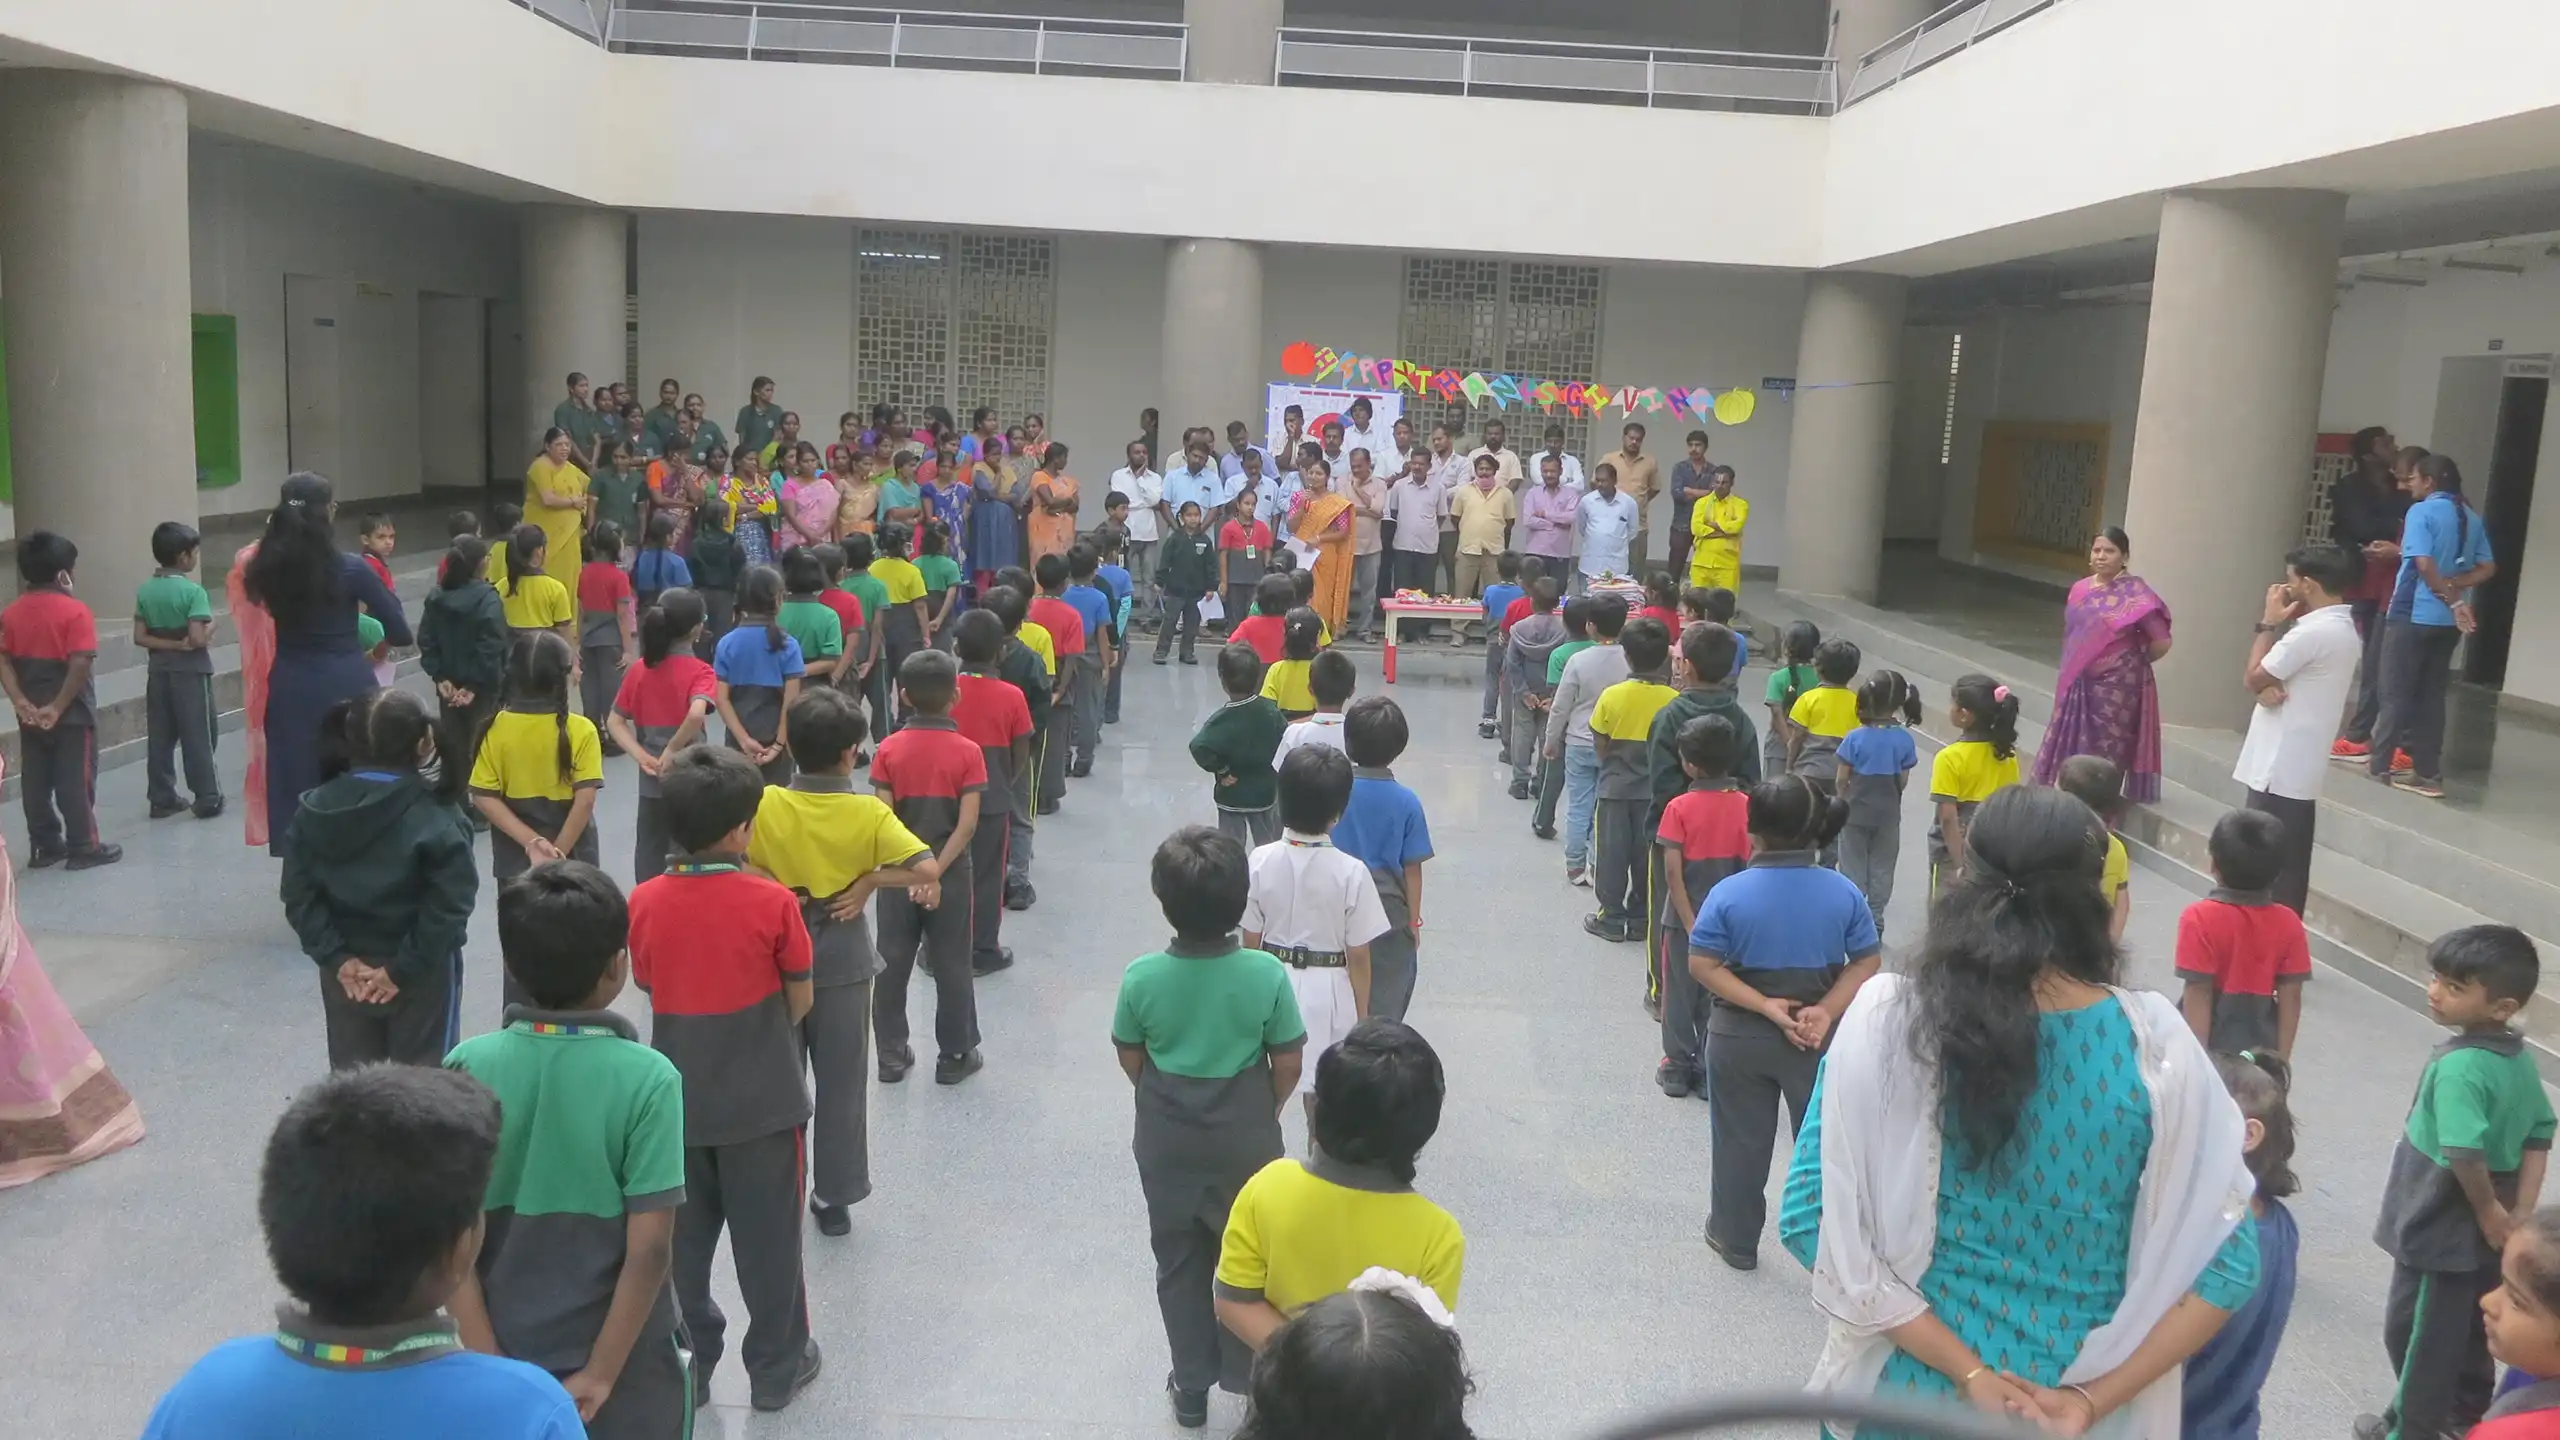 Thanks giving celebration conducted at DPS Warangal during morning assembly in the presence of students and teachers.